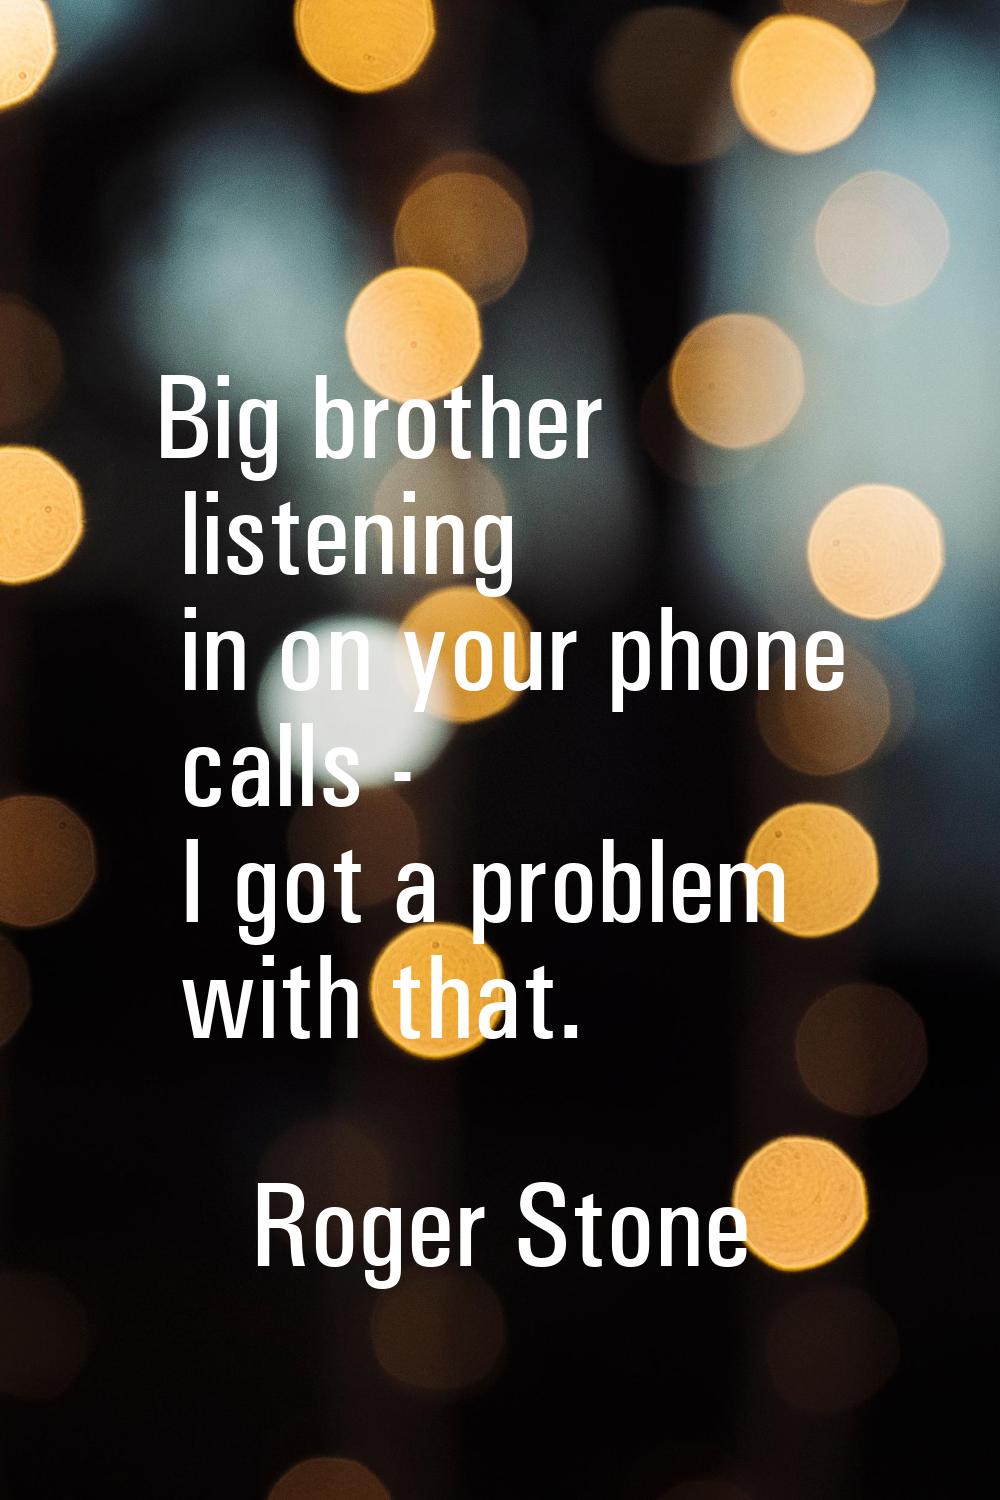 Big brother listening in on your phone calls - I got a problem with that.